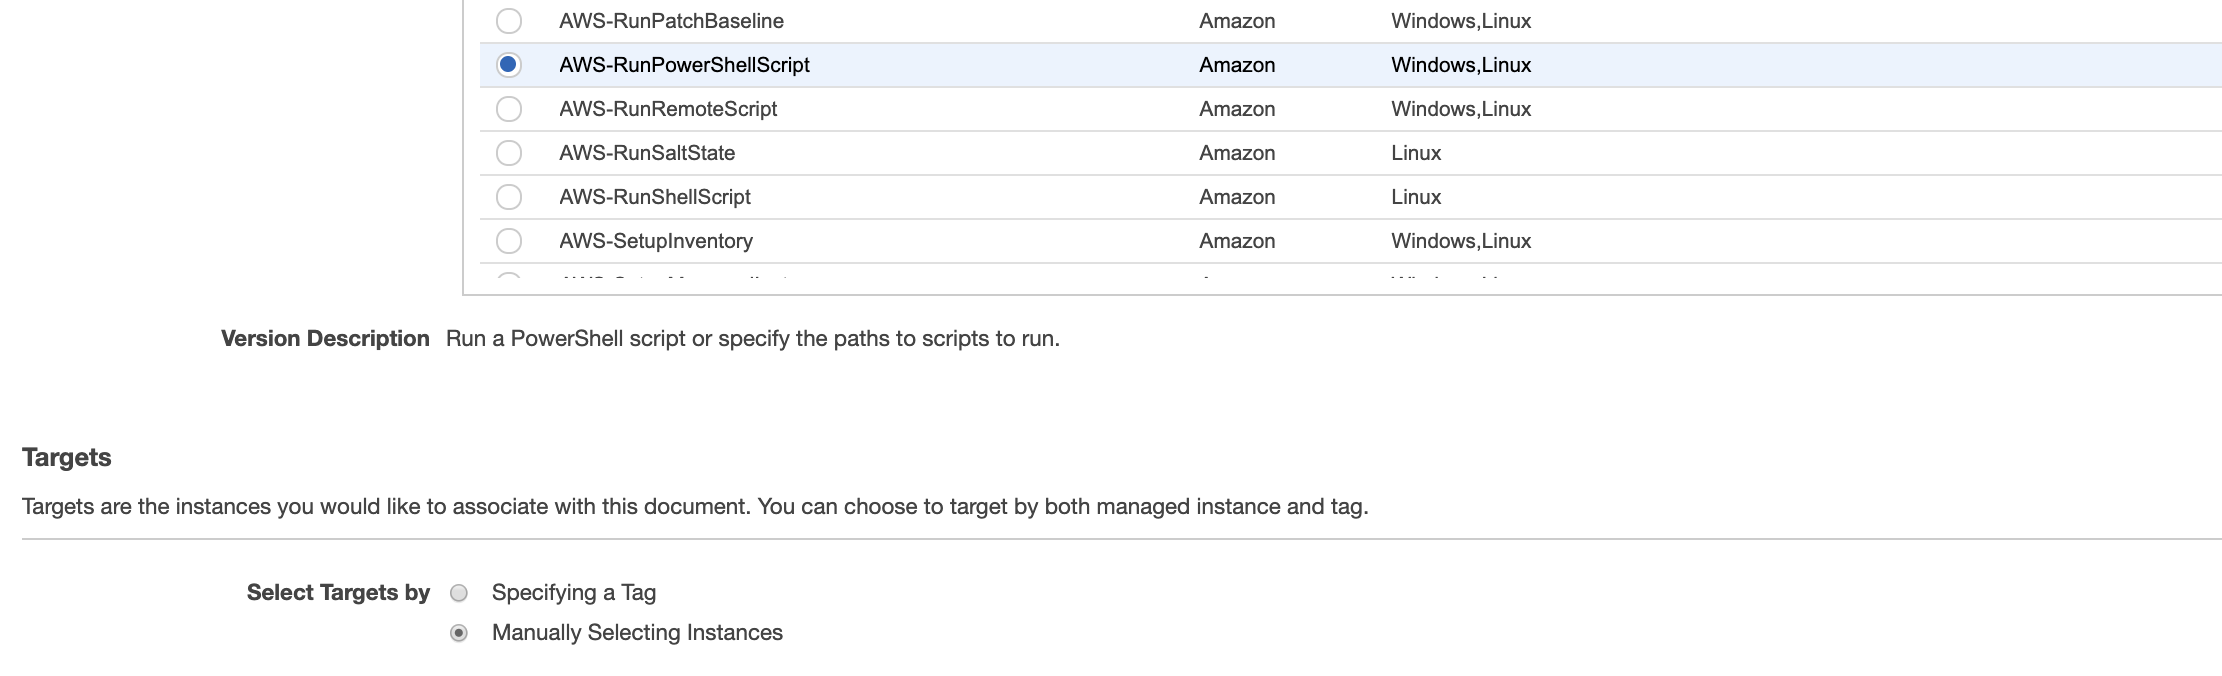 Version Description Run a PowerShell script or specify the paths to scripts to run.

Targets

Targets are the instances you would like to associate with this document. You can choose to target by both managed instance and tag.

Select Targets by ©

AWS-RunPatchBaseline
e@ AWS-RunPowerShellScript
AWS-RunRemoteScript
AWS-RunSaltState
AWS-RunShellScript

AWS-SetupInventory

Specifying a Tag

Manually Selecting Instances

Amazon
Amazon
Amazon
Amazon
Amazon

Amazon

Windows,Linux
Windows,Linux
Windows,Linux
Linux
Linux

Windows,Linux